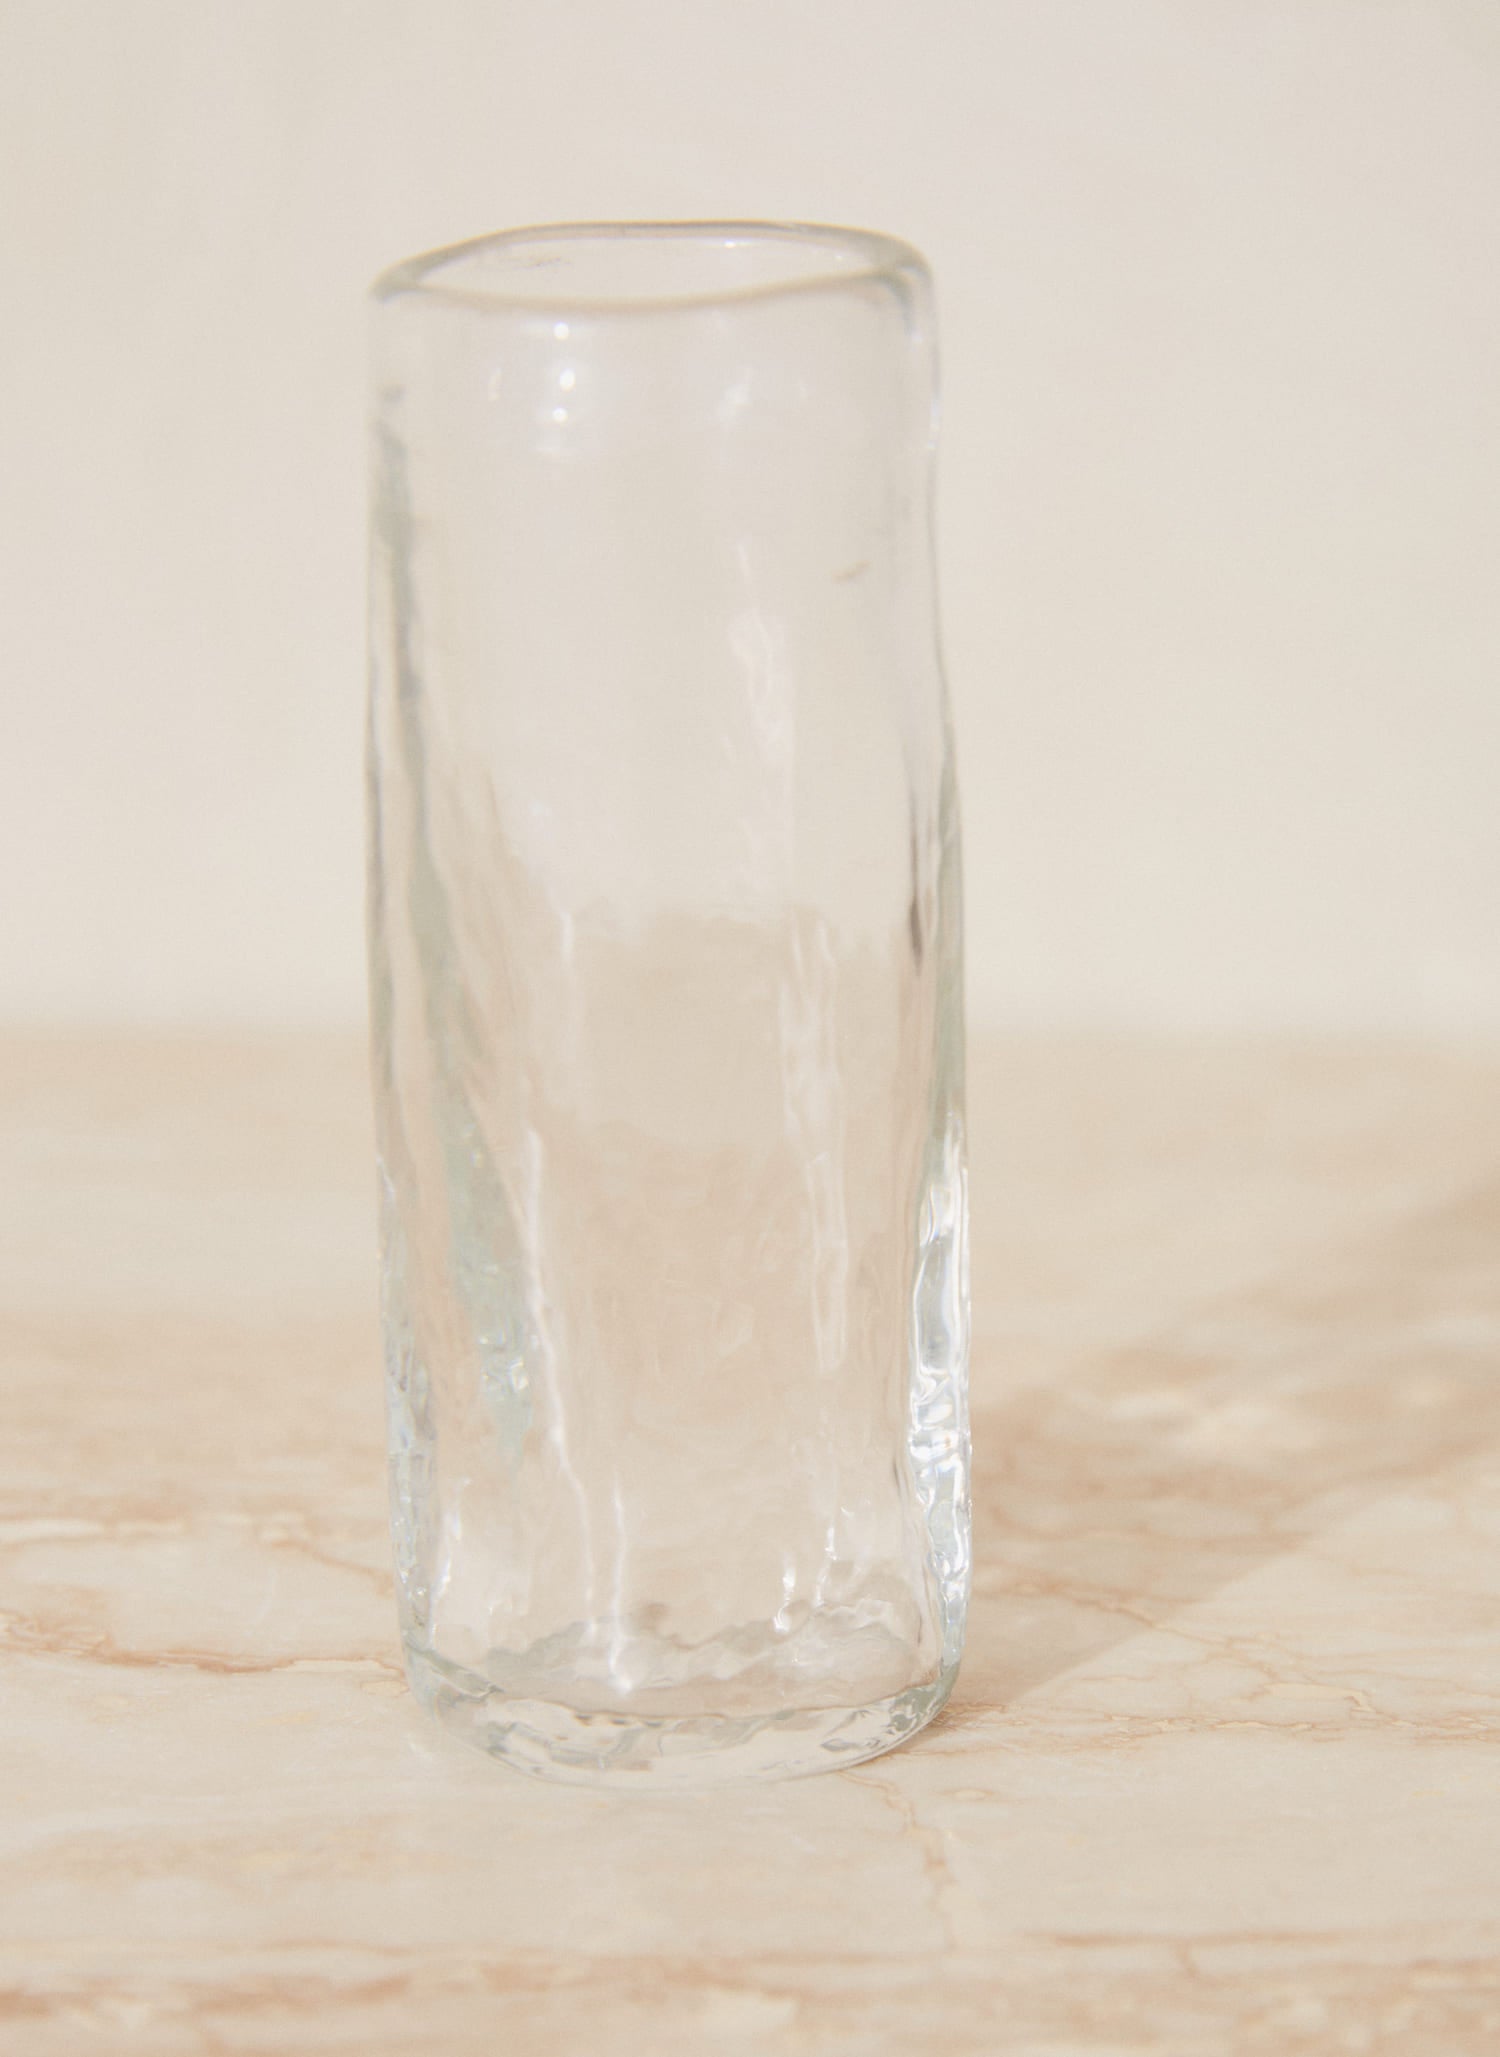 Organic Shot Glass. Tall and slim handblown shot glass designed for entertaining. Made from durable, lead-free recycled glass.